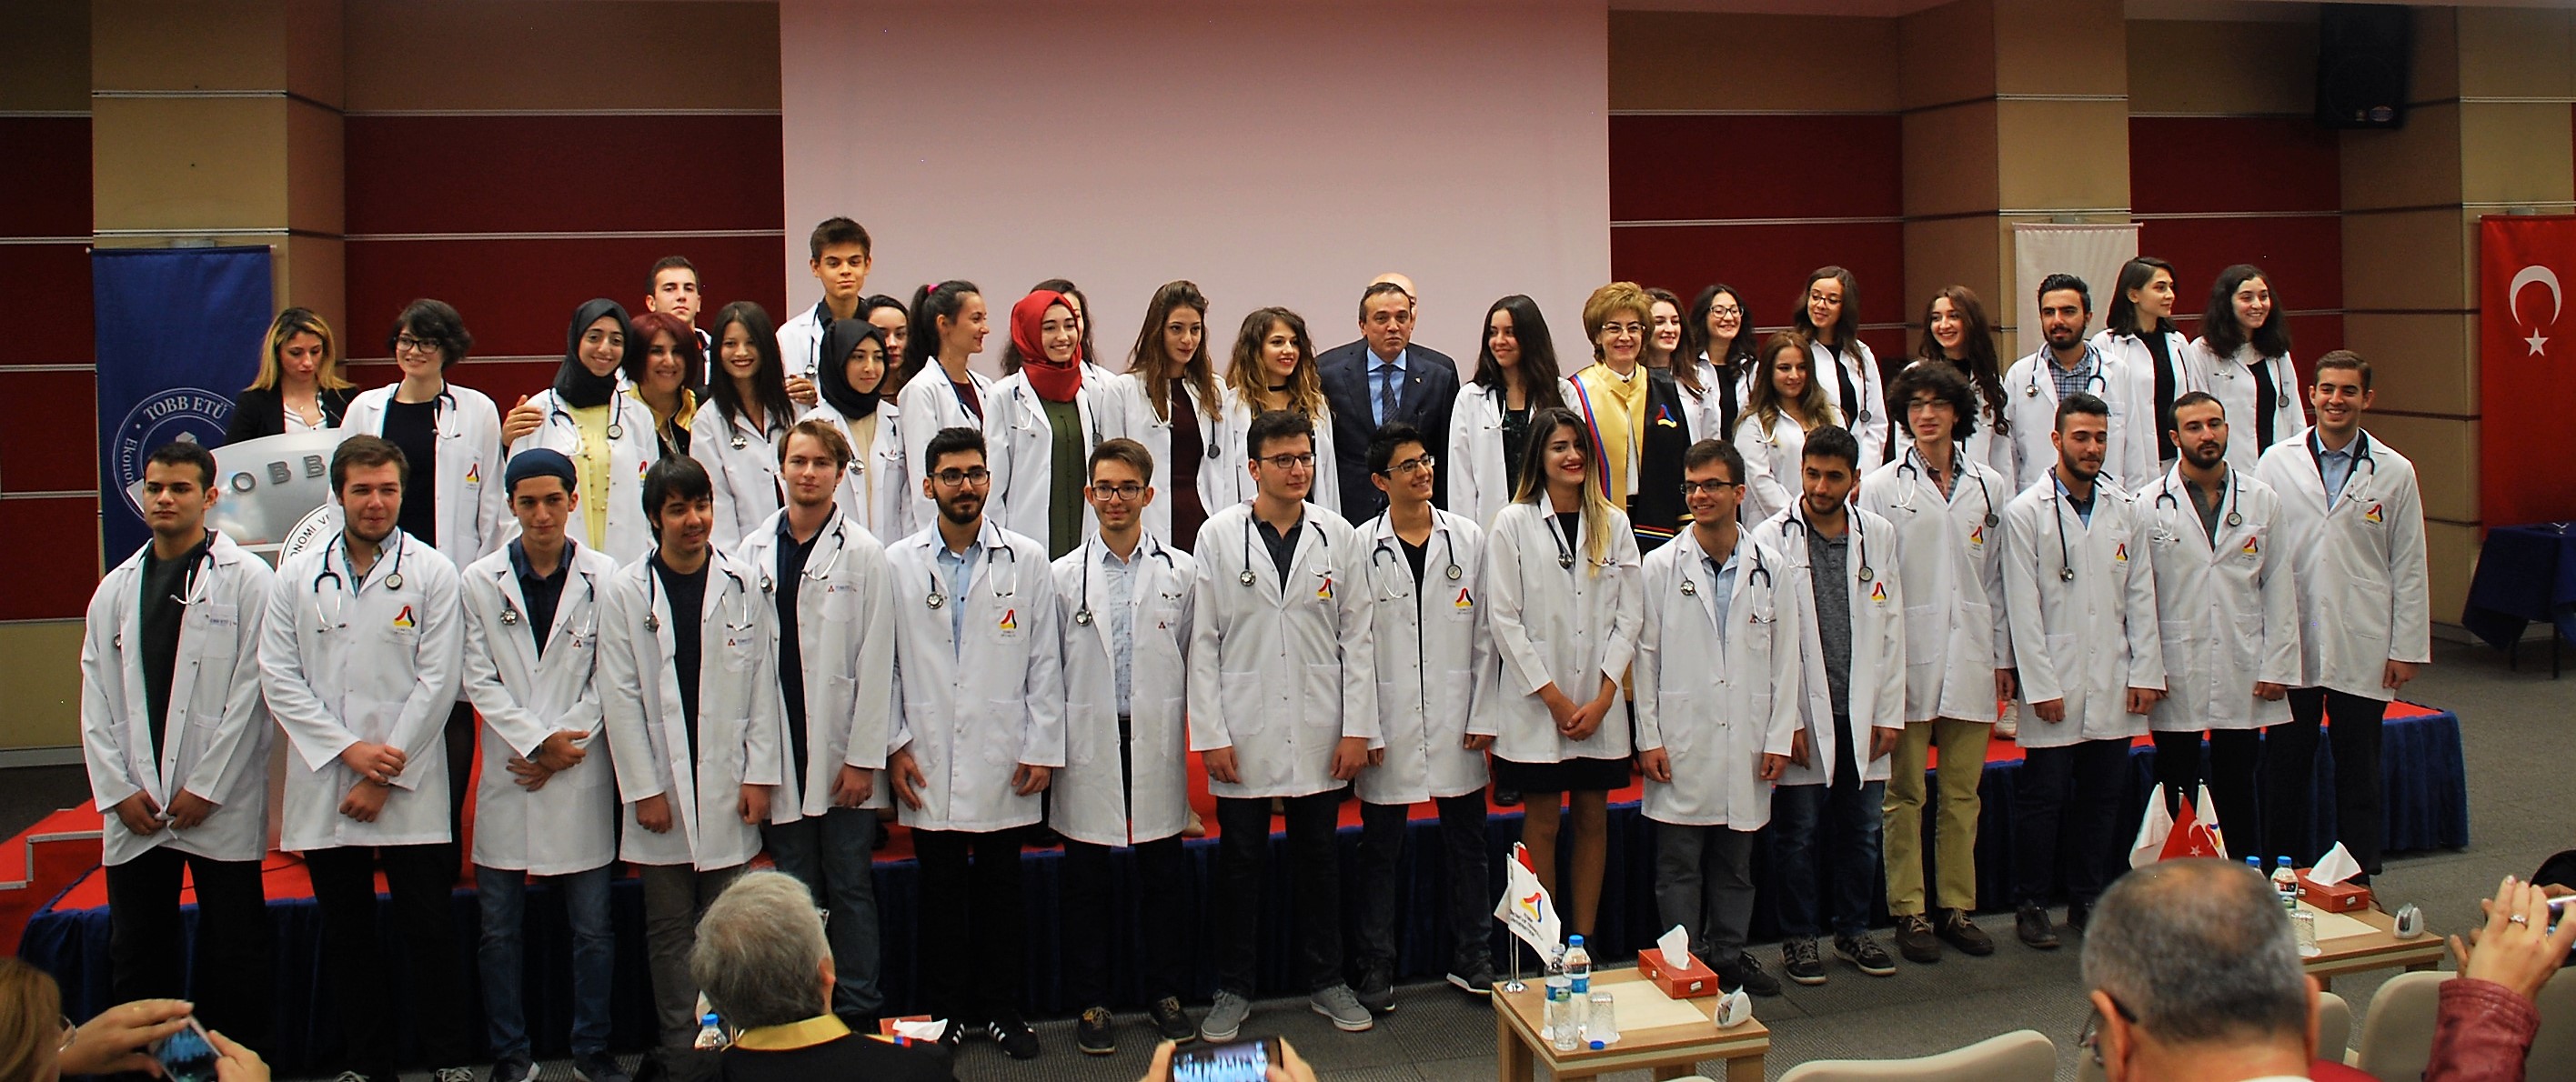 TOBB ETÜ Faculty of Medicine Has Welcomed Its Students, The Class of ’17 – ‘18, With the White Coat Ceremony